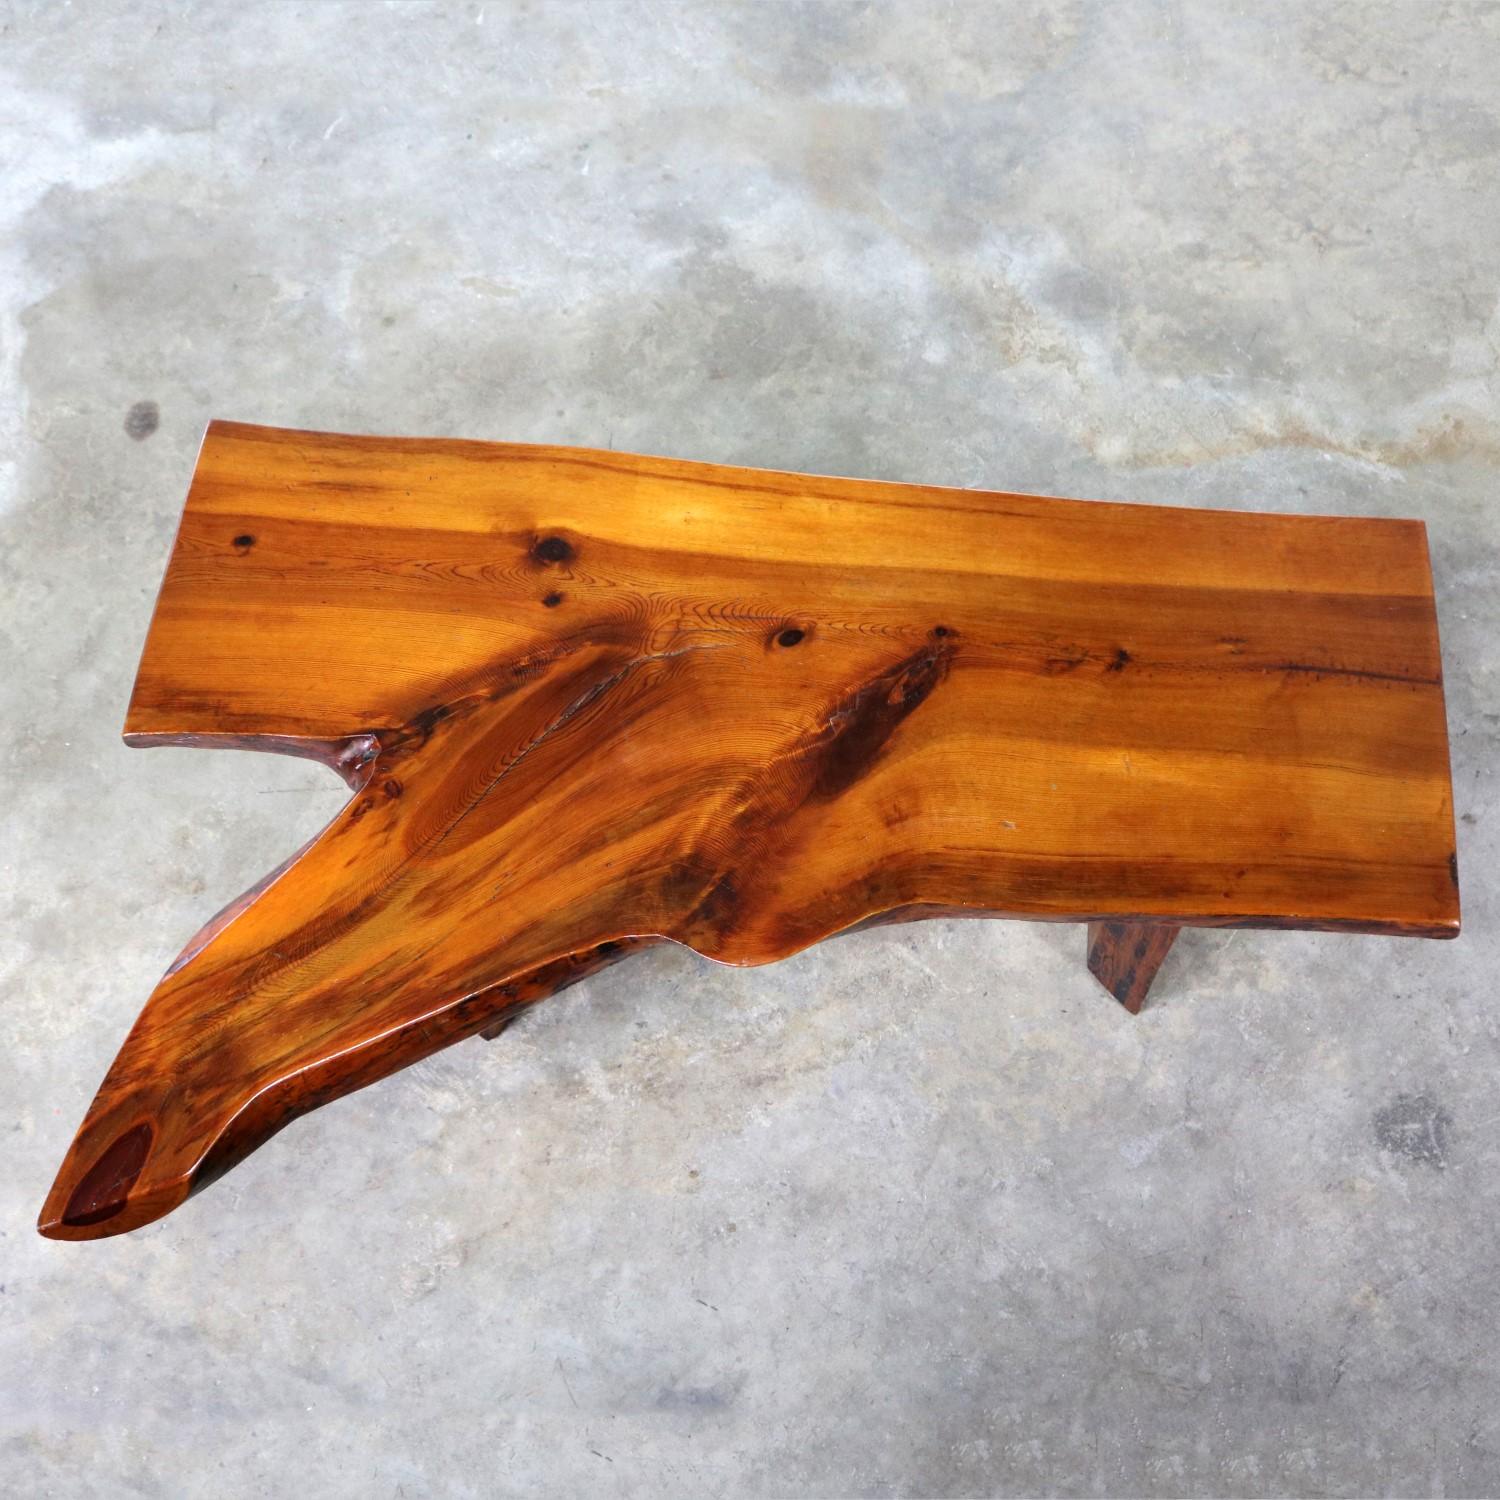 Incredible midcentury live edge or free edge solid slab coffee table or bench in the style of George Nakashima. It is in wonderful vintage condition with normal wear, circa 1950s-1980s.

Organic modern is always in style. And this coffee table, or